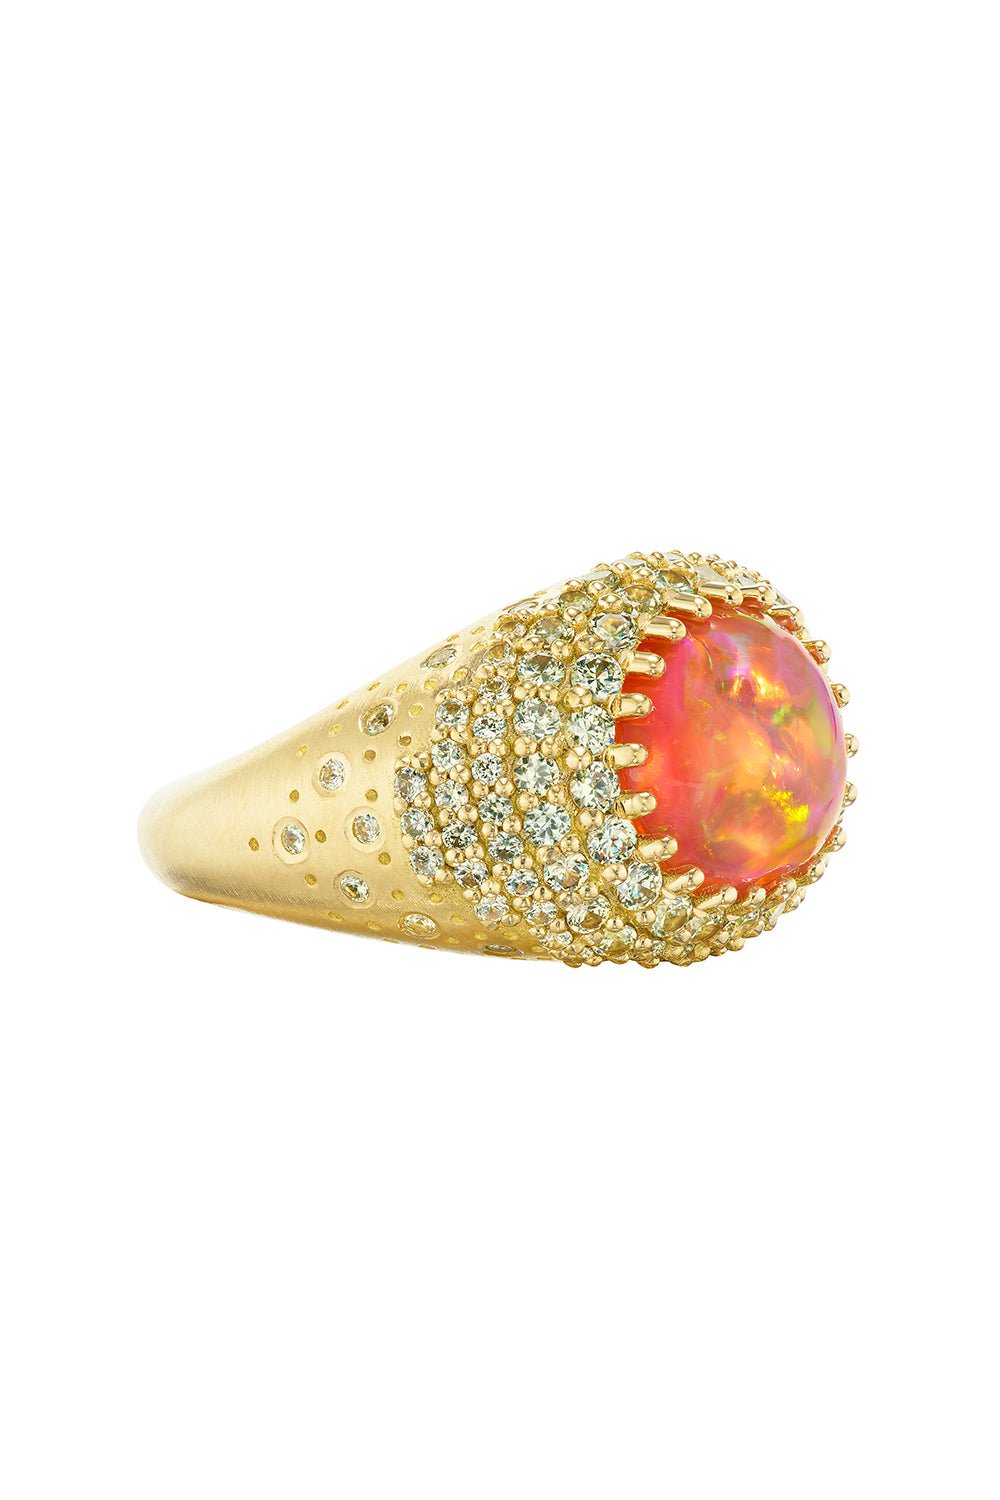 MEREDITH YOUNG-Supernova Fire Opal Ring-YELLOW GOLD